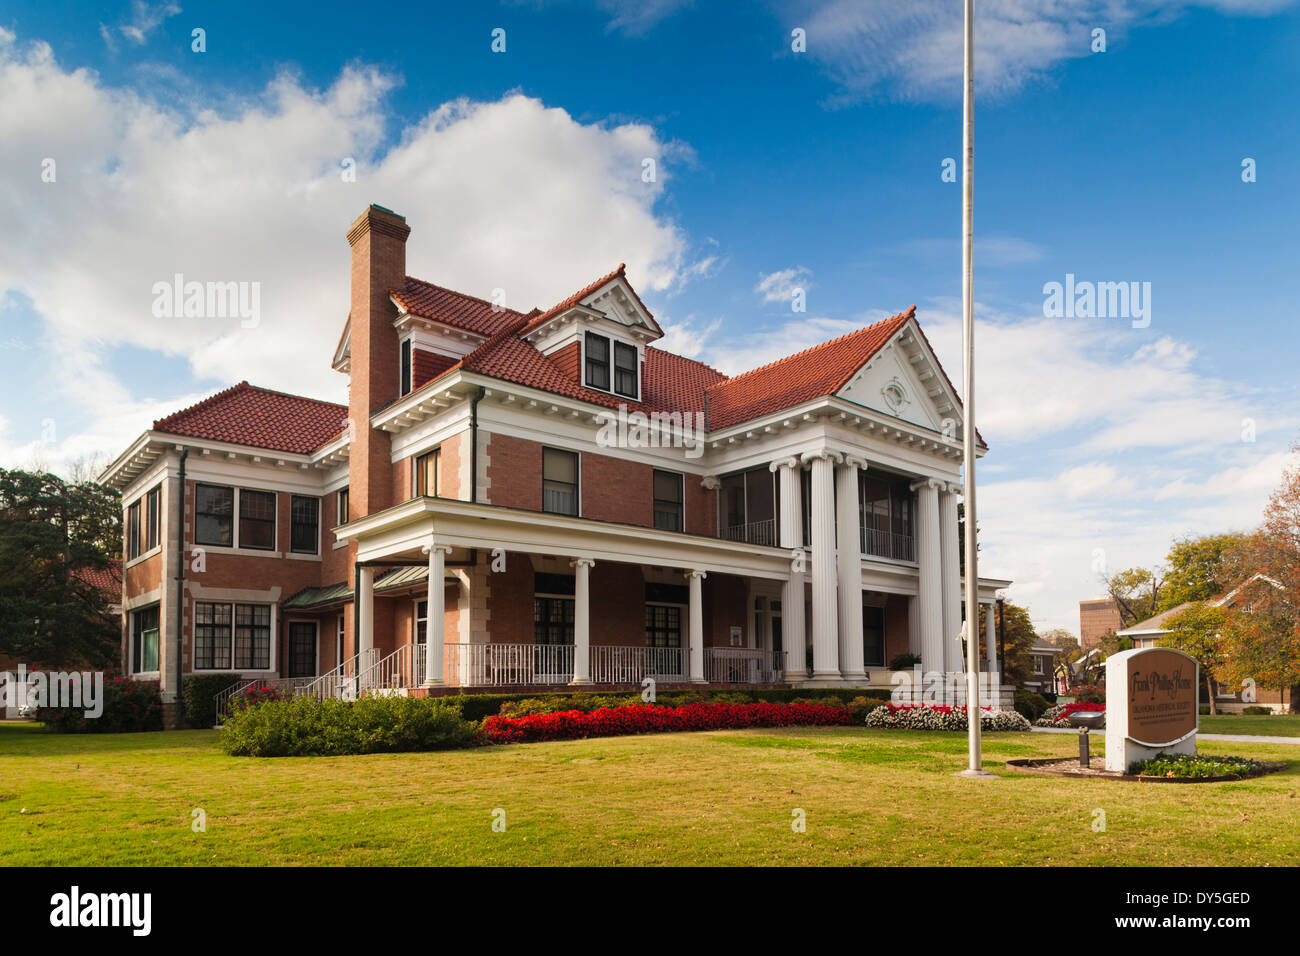 USA, Oklahoma, Bartlesville, Frank Phillips Home, house of the founder of the Phillips Petroleum company Stock Photo